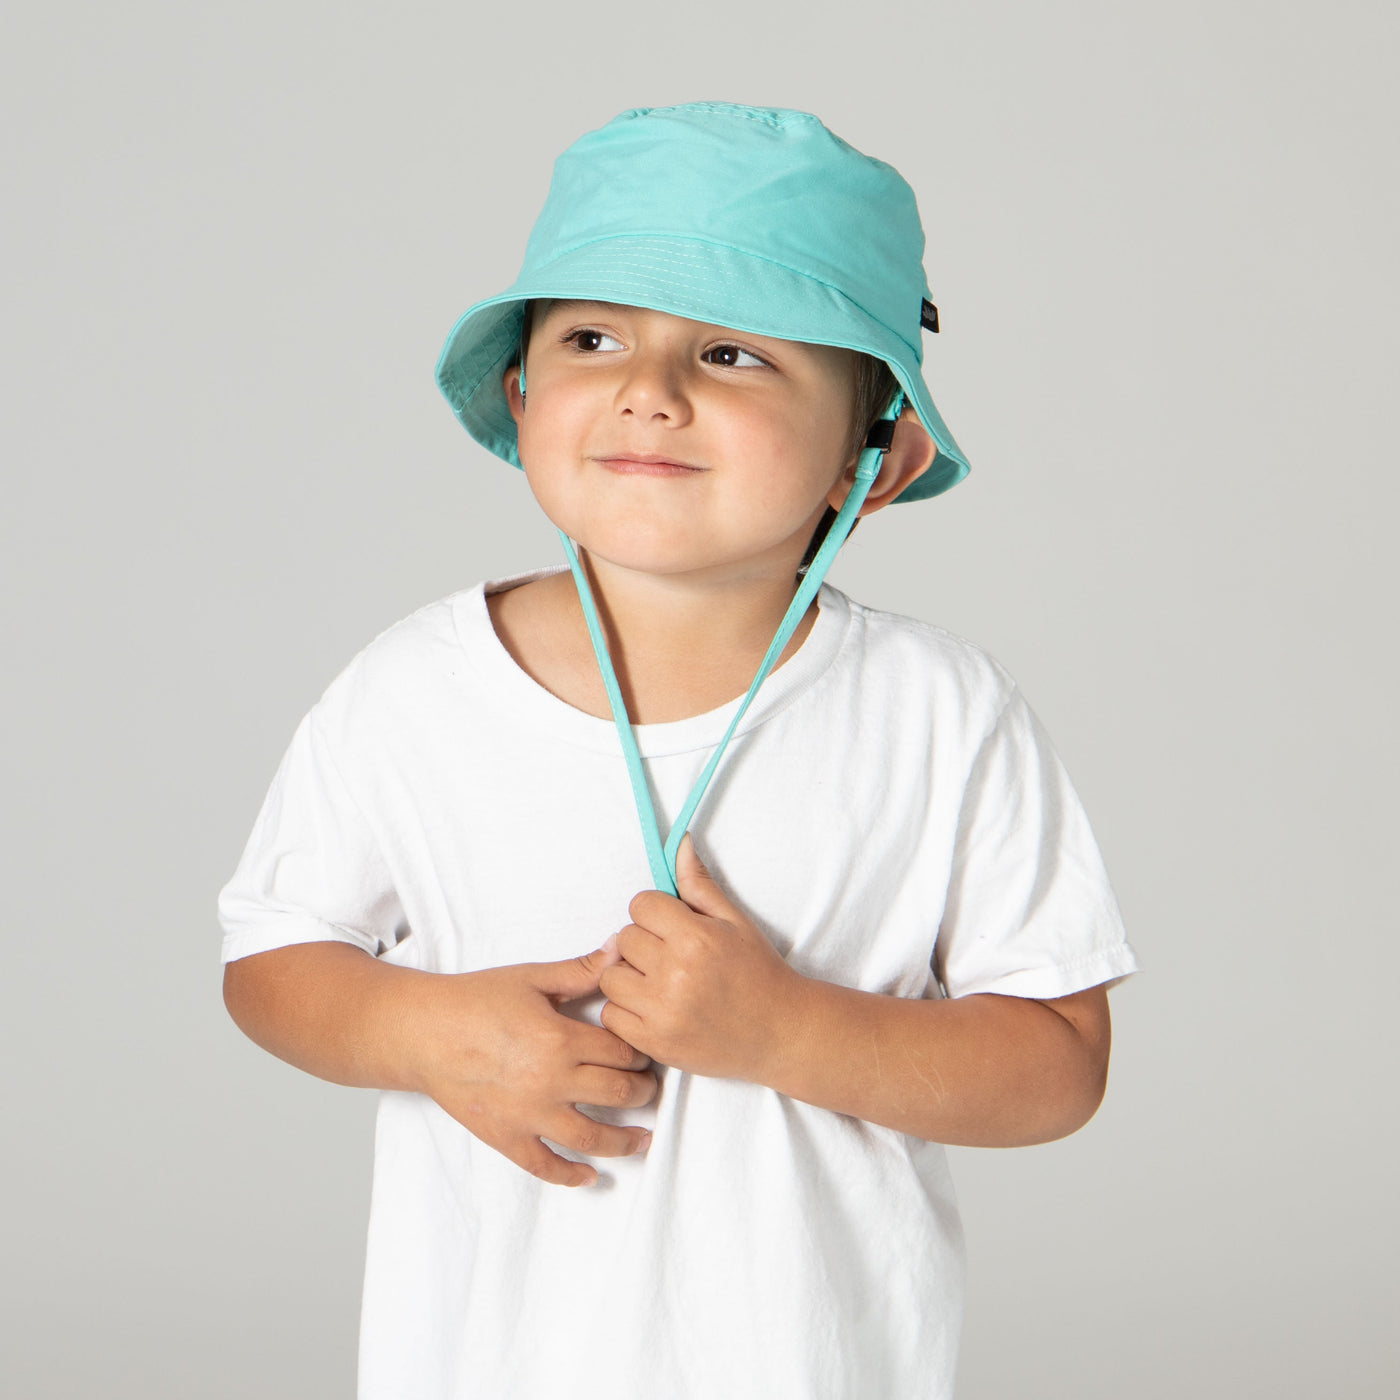 BUCKET - Kid's Colorful Bucket Hat With Adjustable Chin Strap And Tear Away Clip